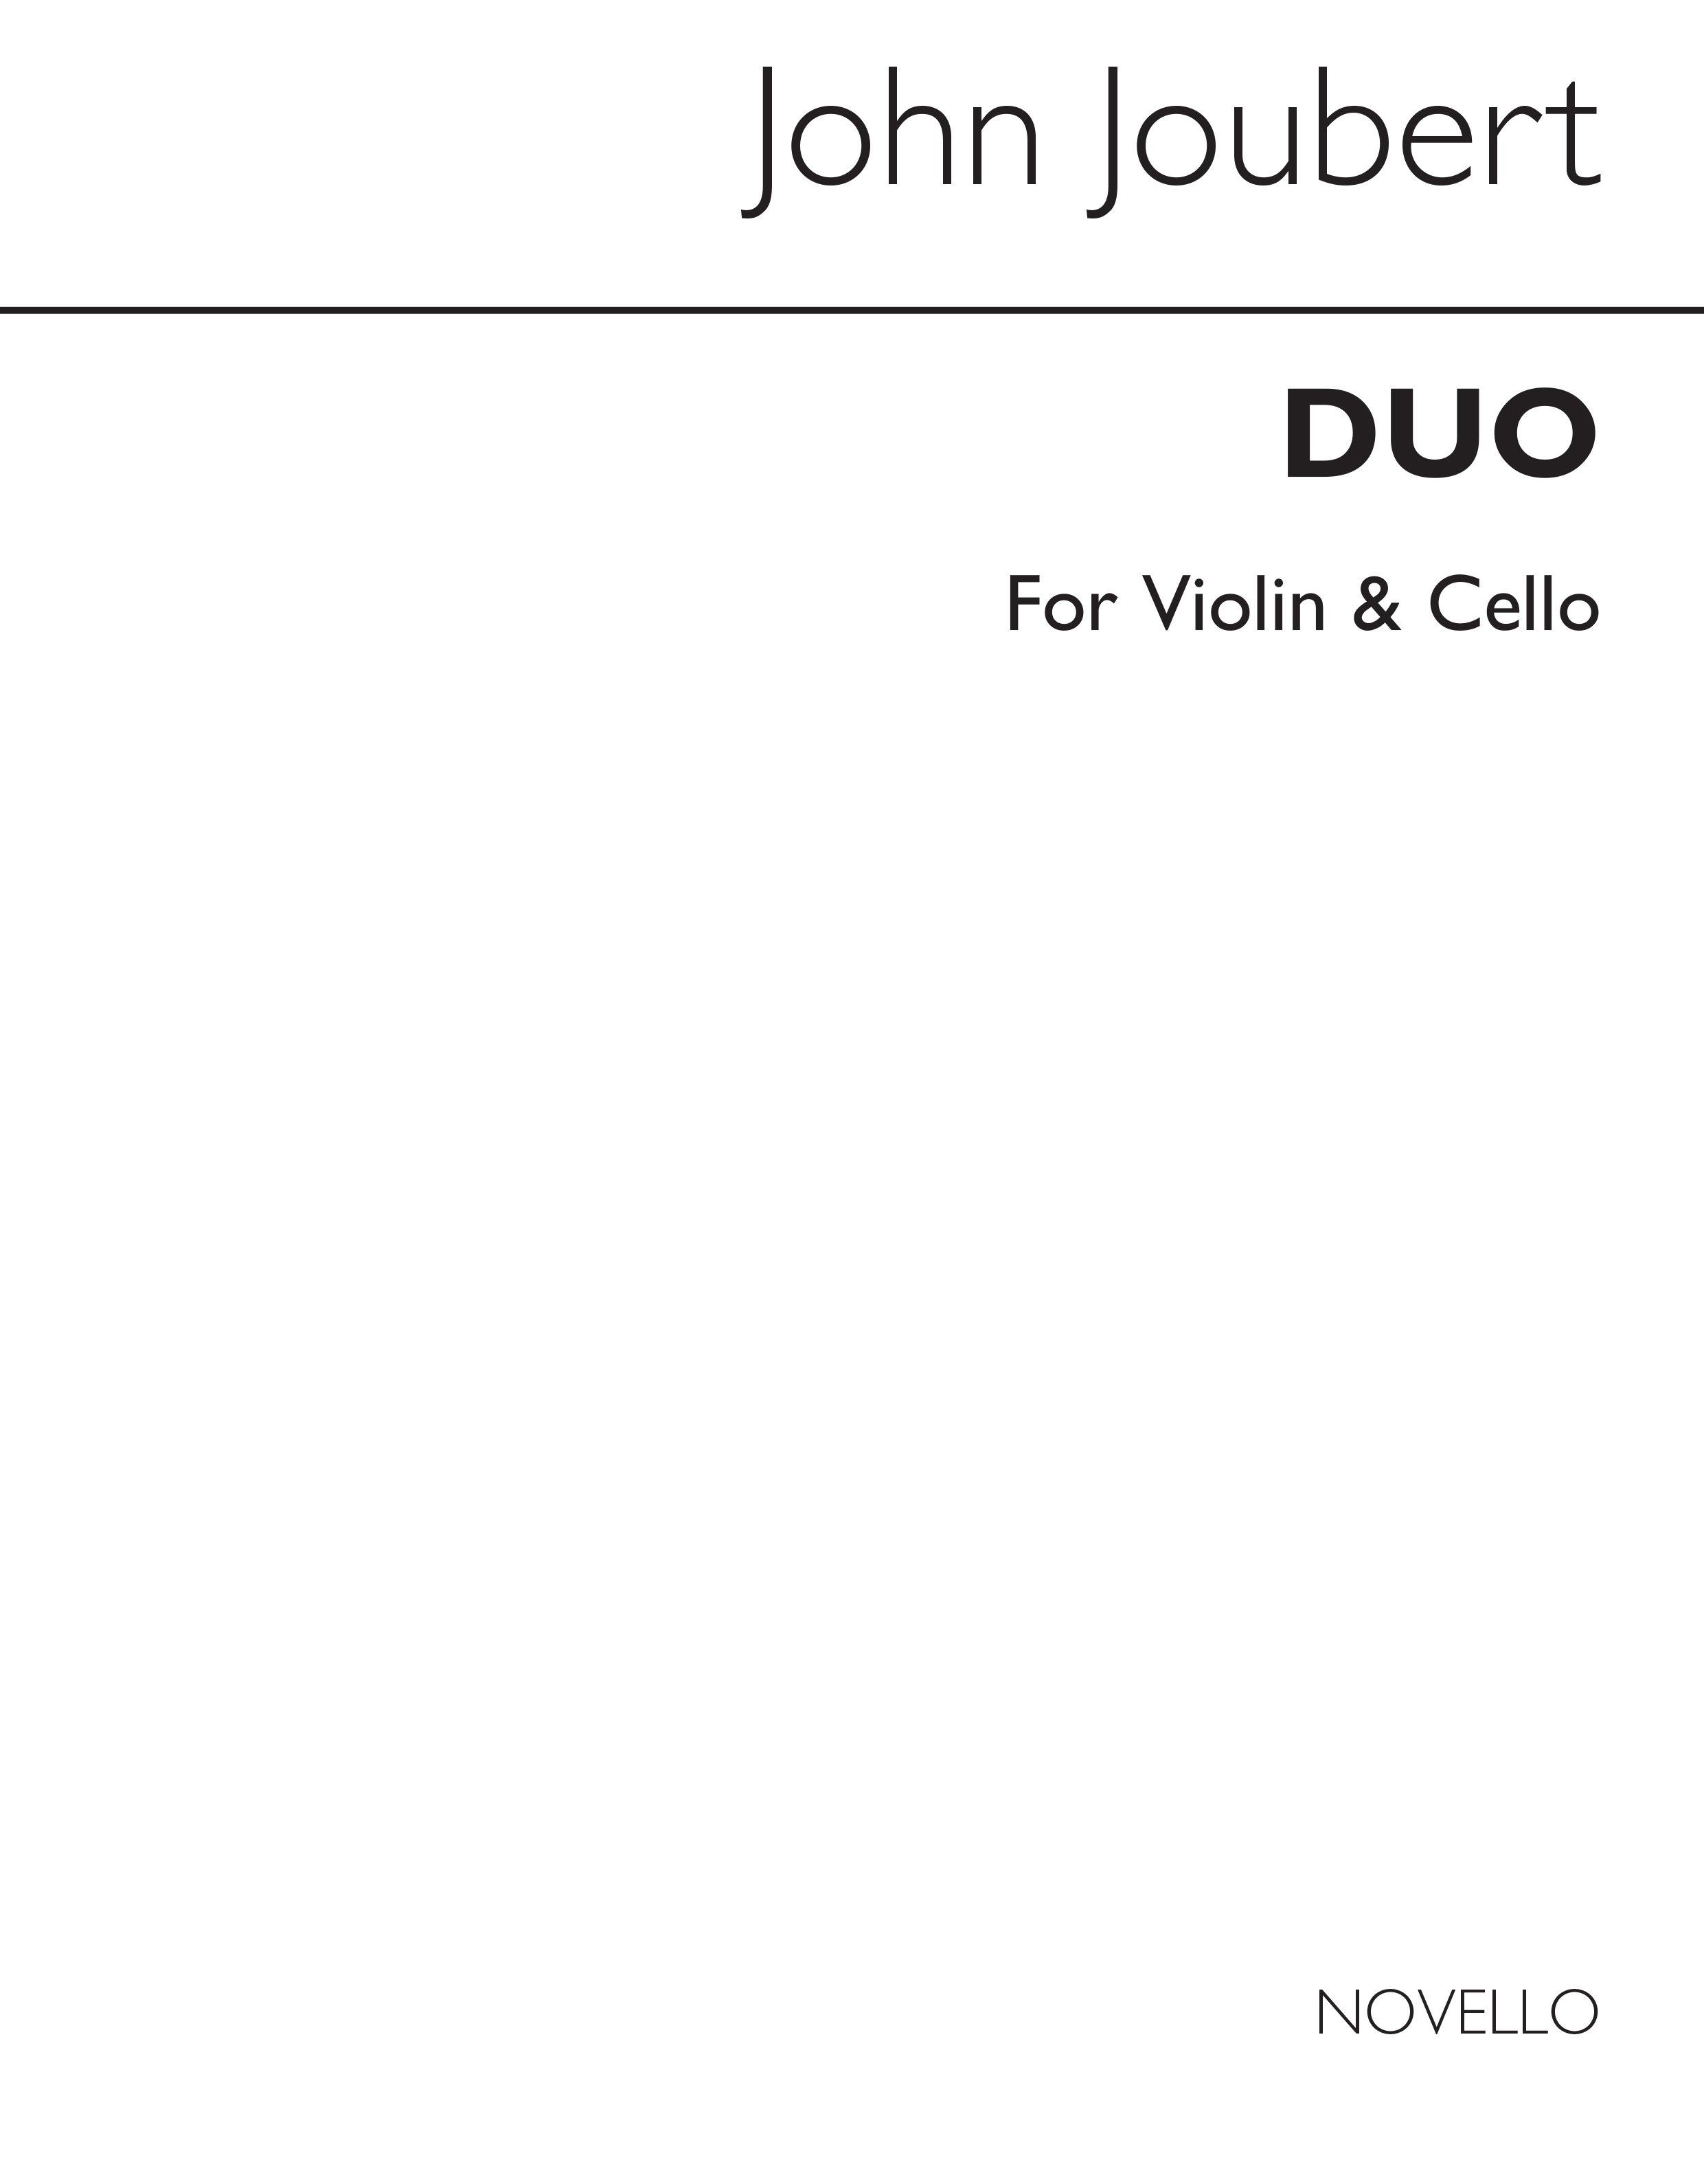 Joubert: Duo For Violin And Cello